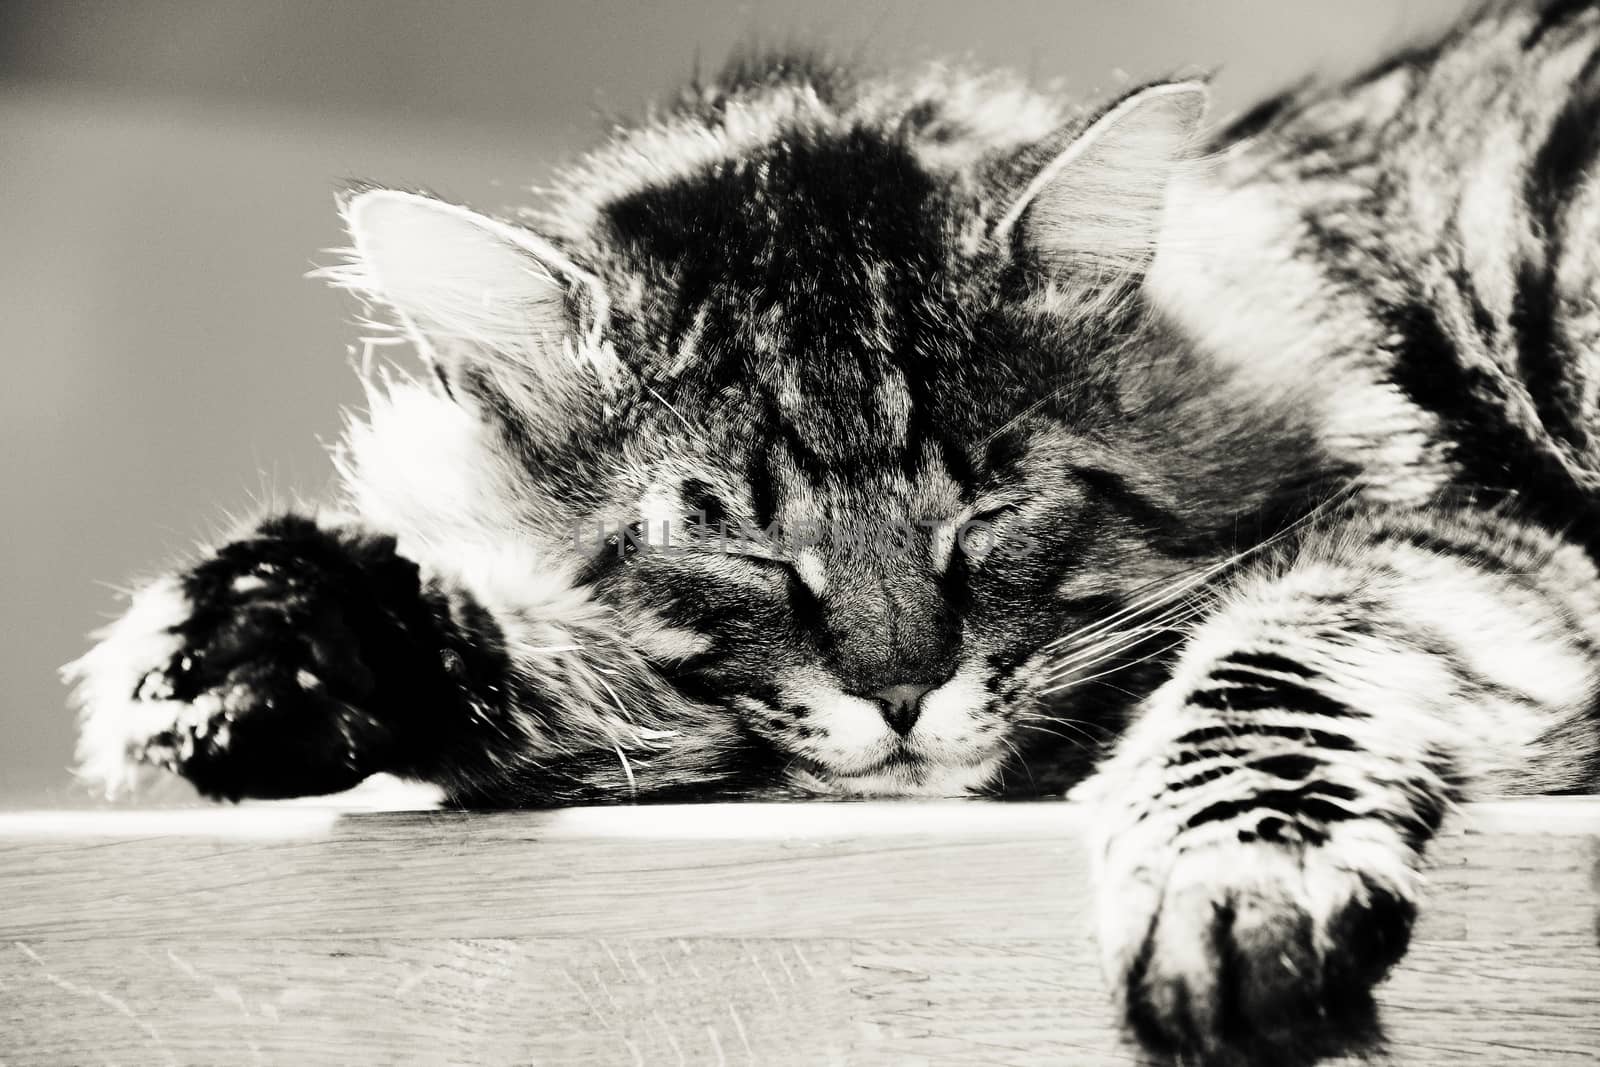 sleeping striped cat or kitten indoors. photo. black and white